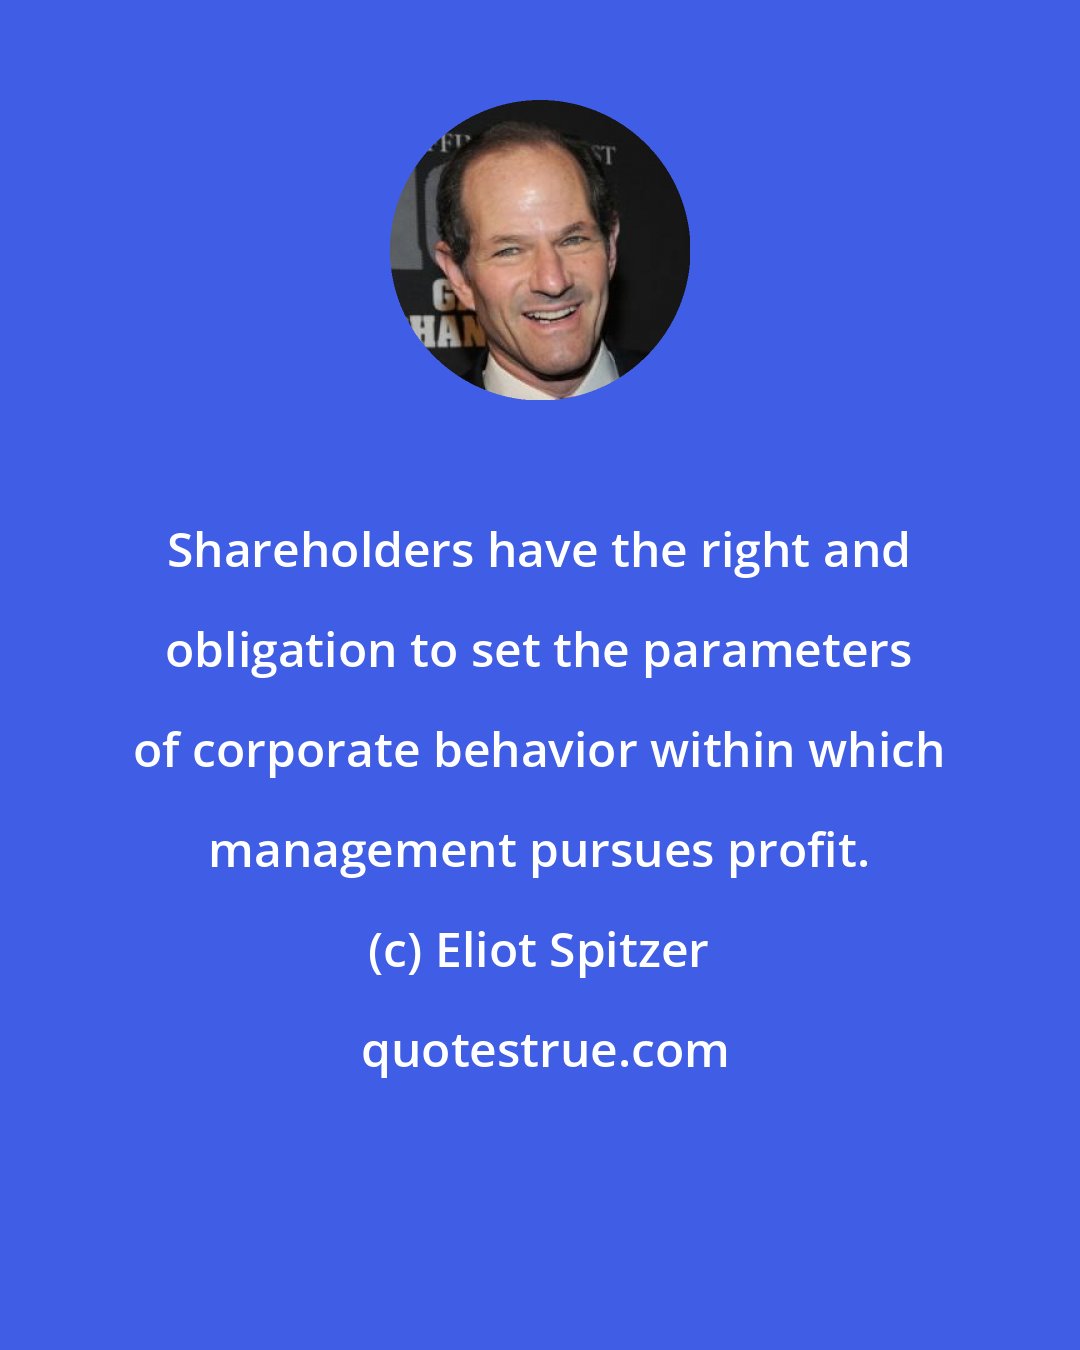 Eliot Spitzer: Shareholders have the right and obligation to set the parameters of corporate behavior within which management pursues profit.